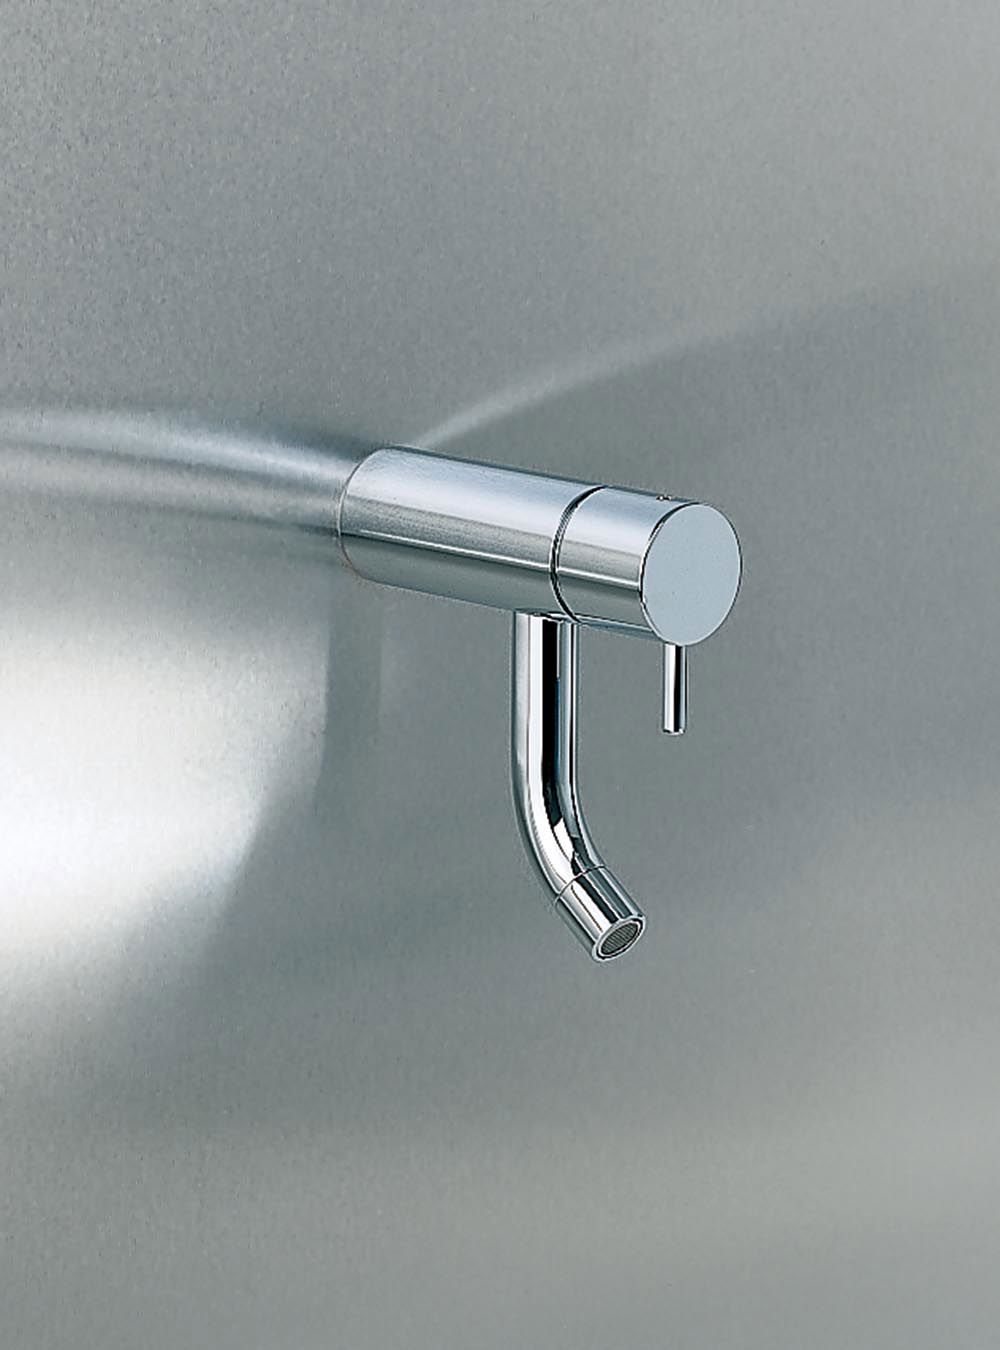 RB4: Pillar tap with ¼ turn ceramic disc technology, with fixed spout and water saving aerator. 